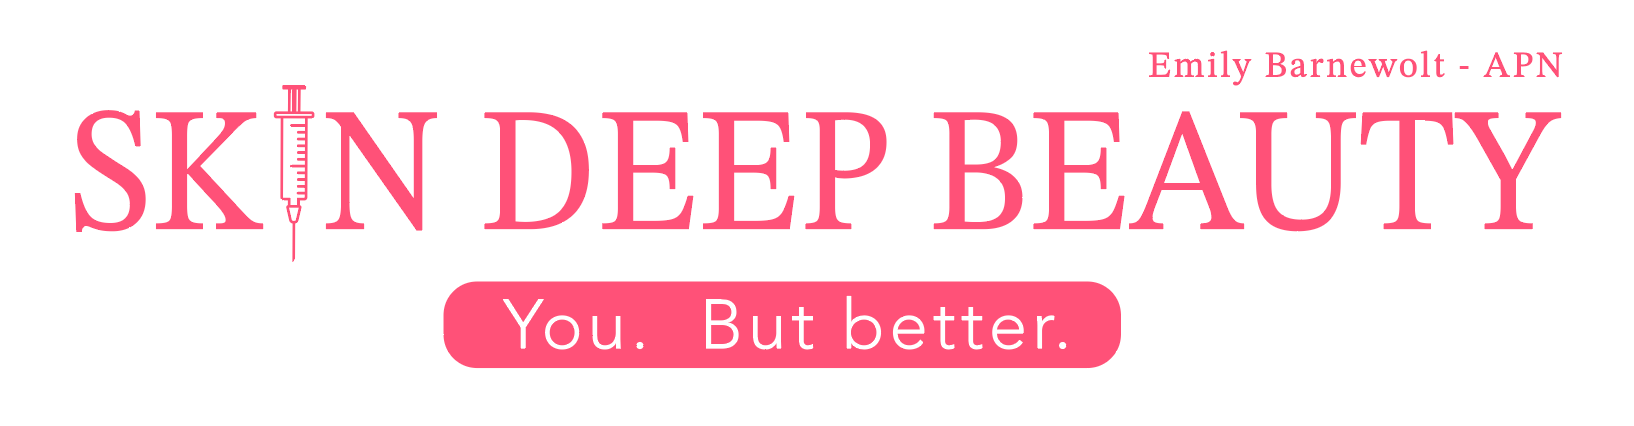 A pink and white logo for skin deep beauty